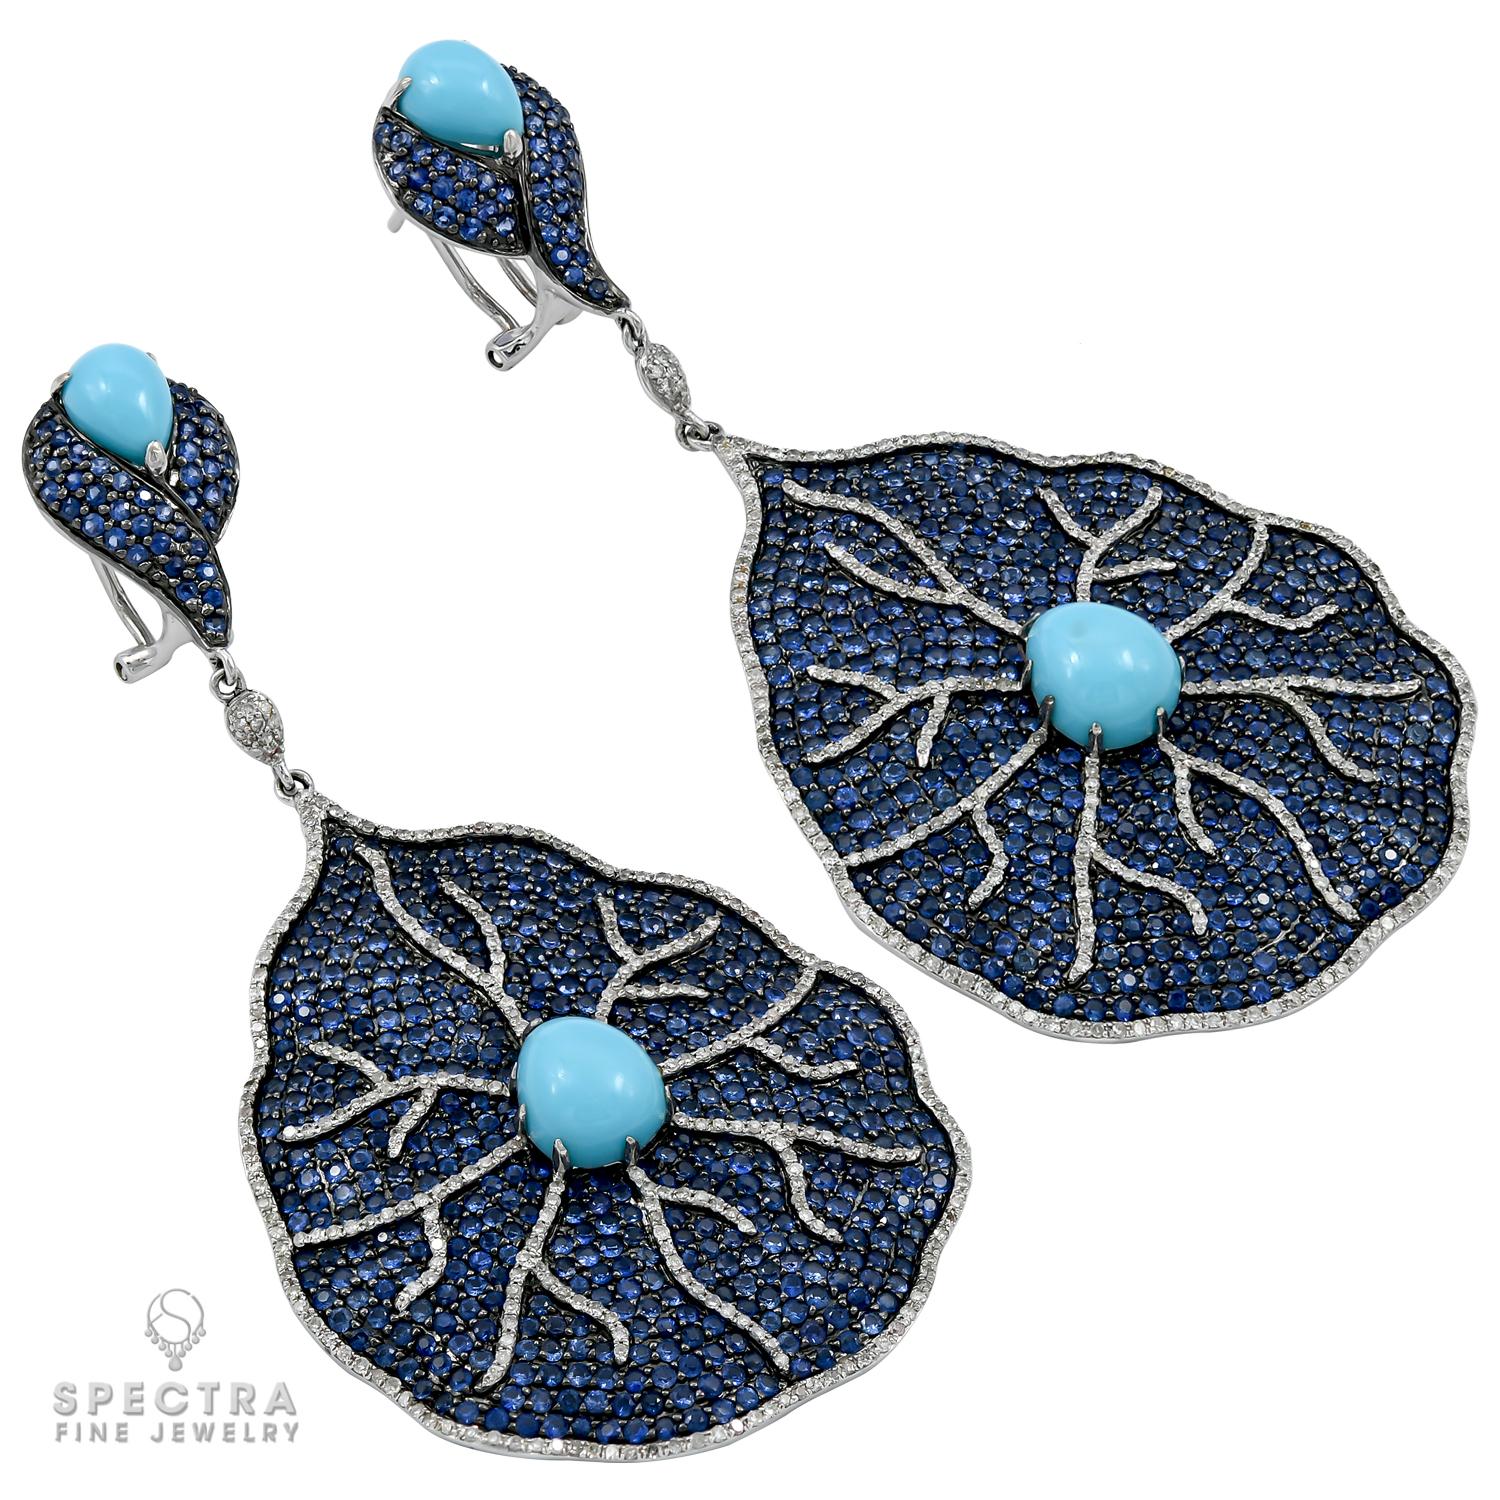 Beautiful and festive chandelier earrings, comprising of cabochon turquoise stones, sapphires and diamonds.
All stones are natural.
Metal is 18k white gold; gross weight: 32.94 g.
3.22 in long (8.2 cm).